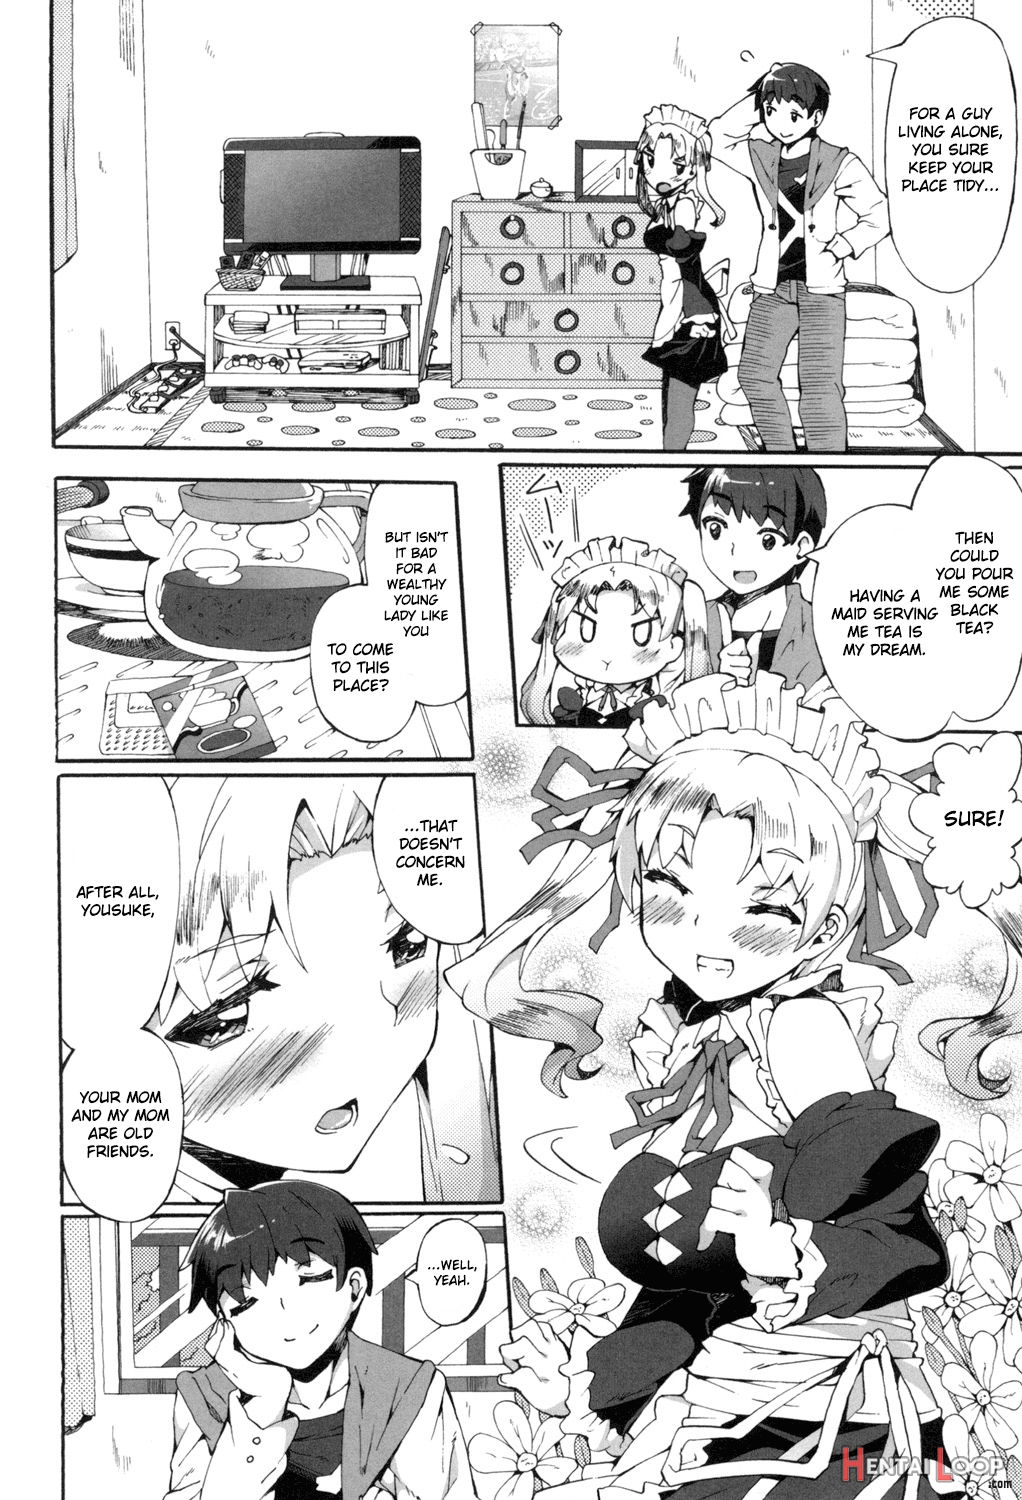 Maid In Japan! page 2